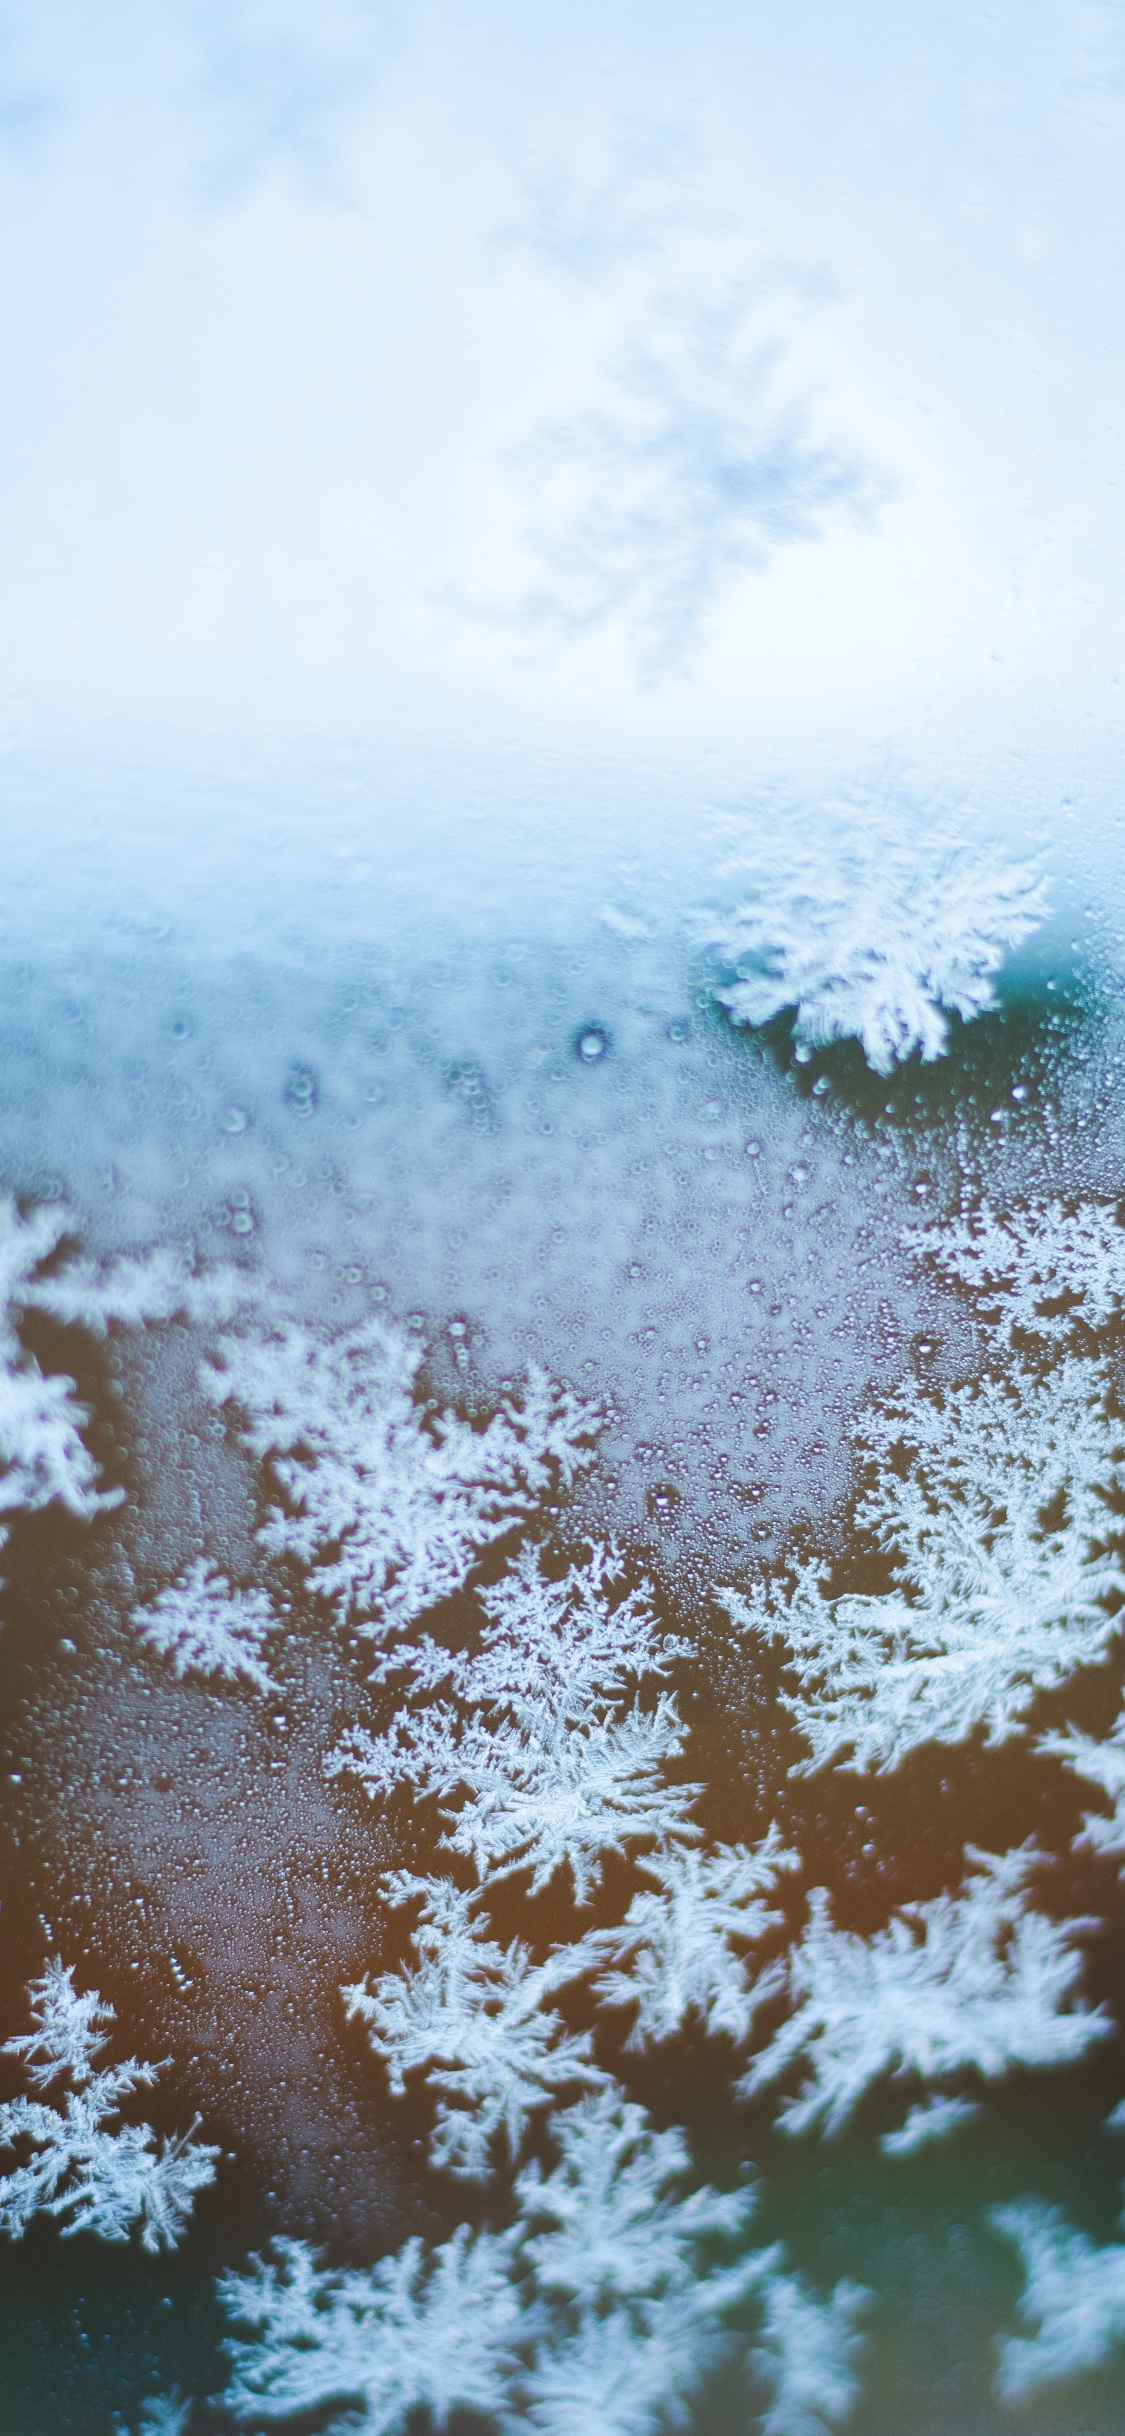 Snowflake, Freezing, Winter, Snow, Frost. Wallpaper in 1125x2436 Resolution